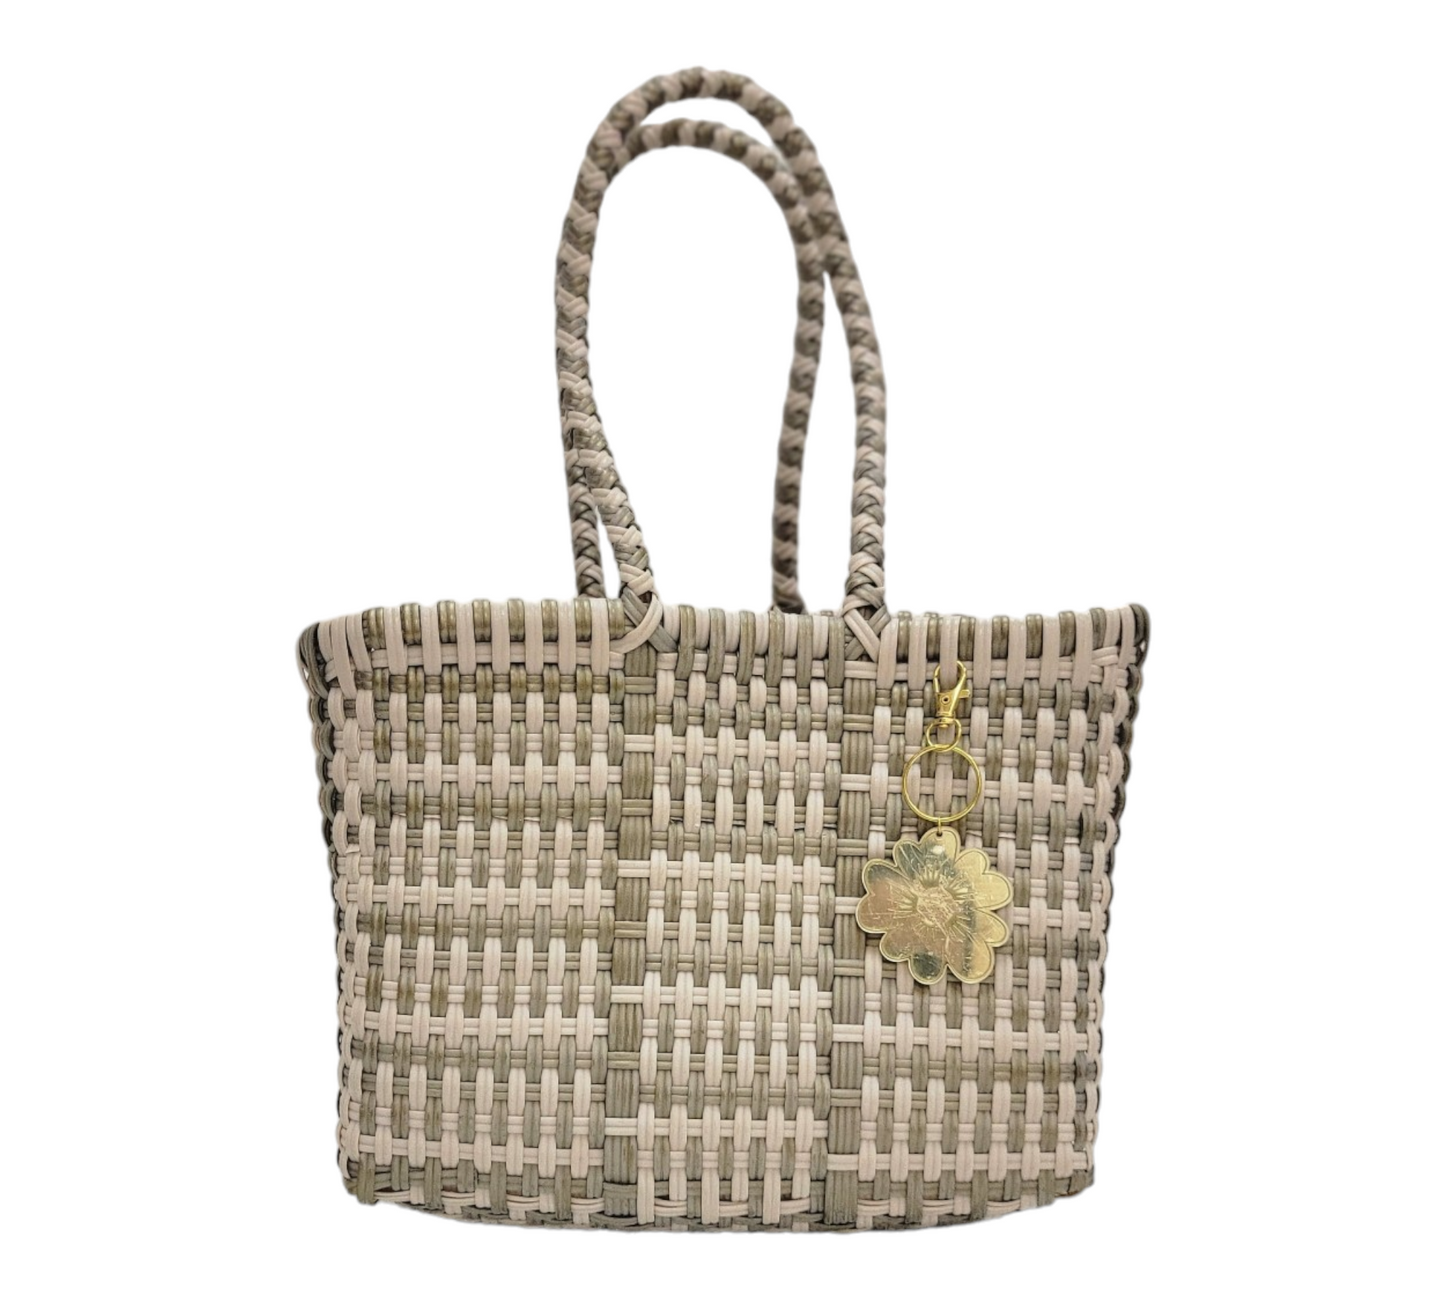 Gold & Cream Mini Tote | Handwoven recycled bags